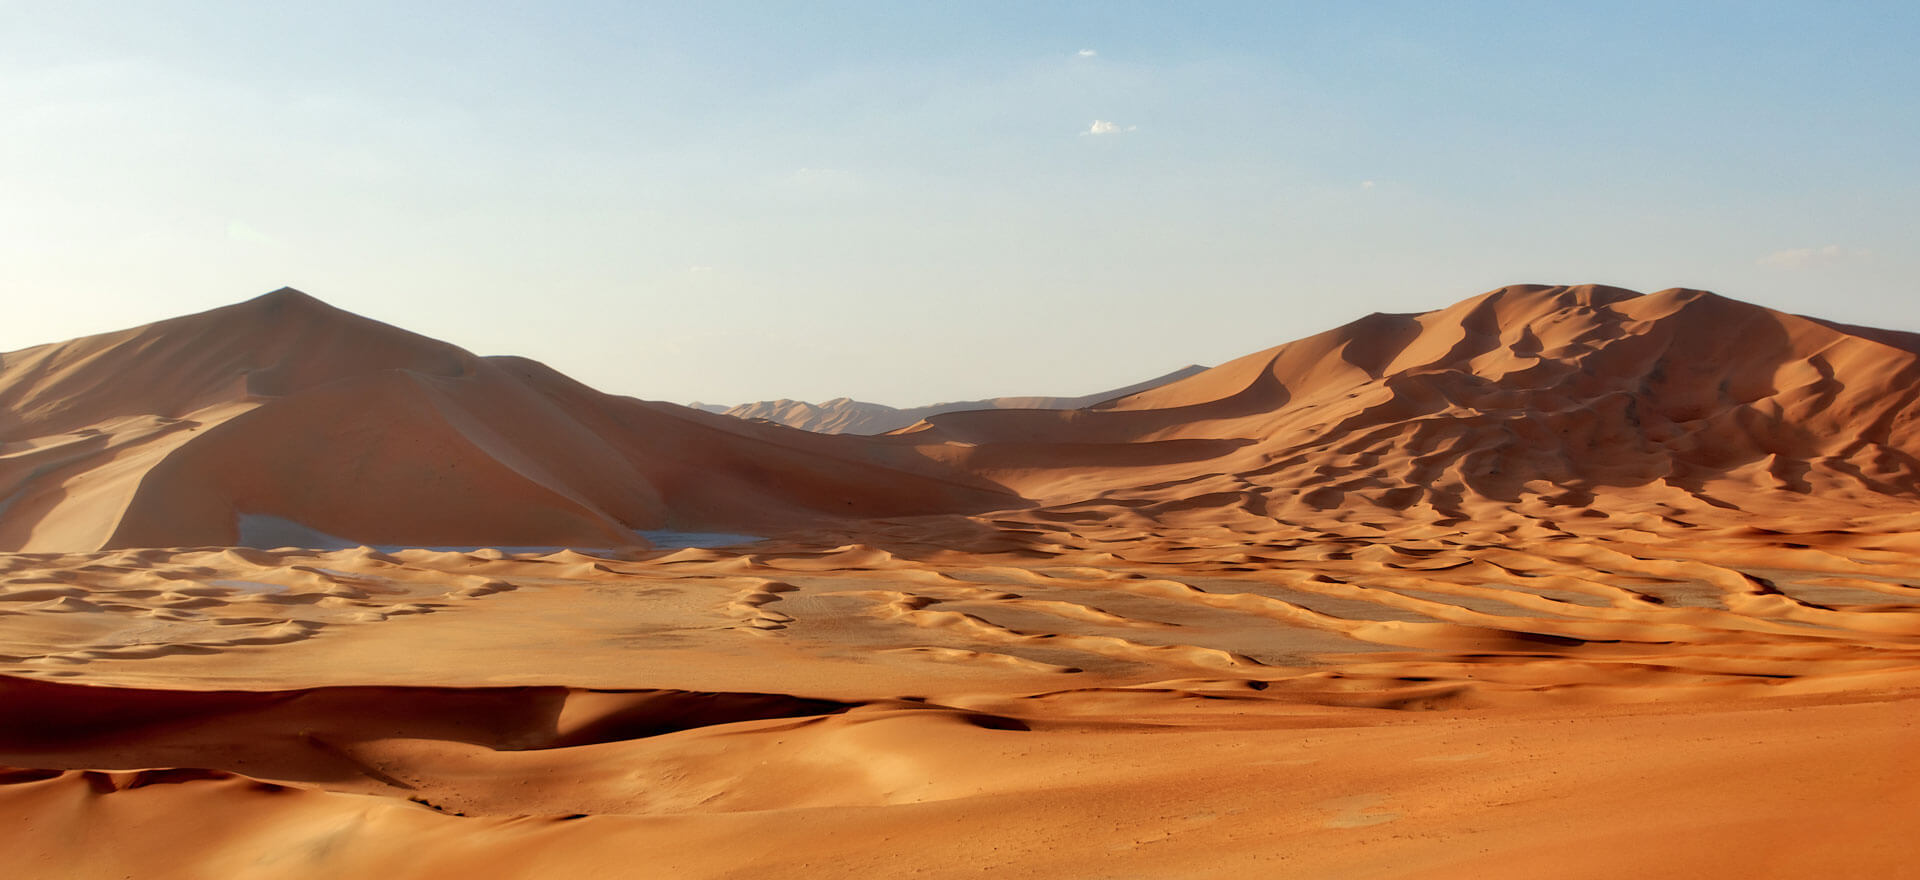 Sand dunes of the Empty Quarter - Oman Holidays and Tours